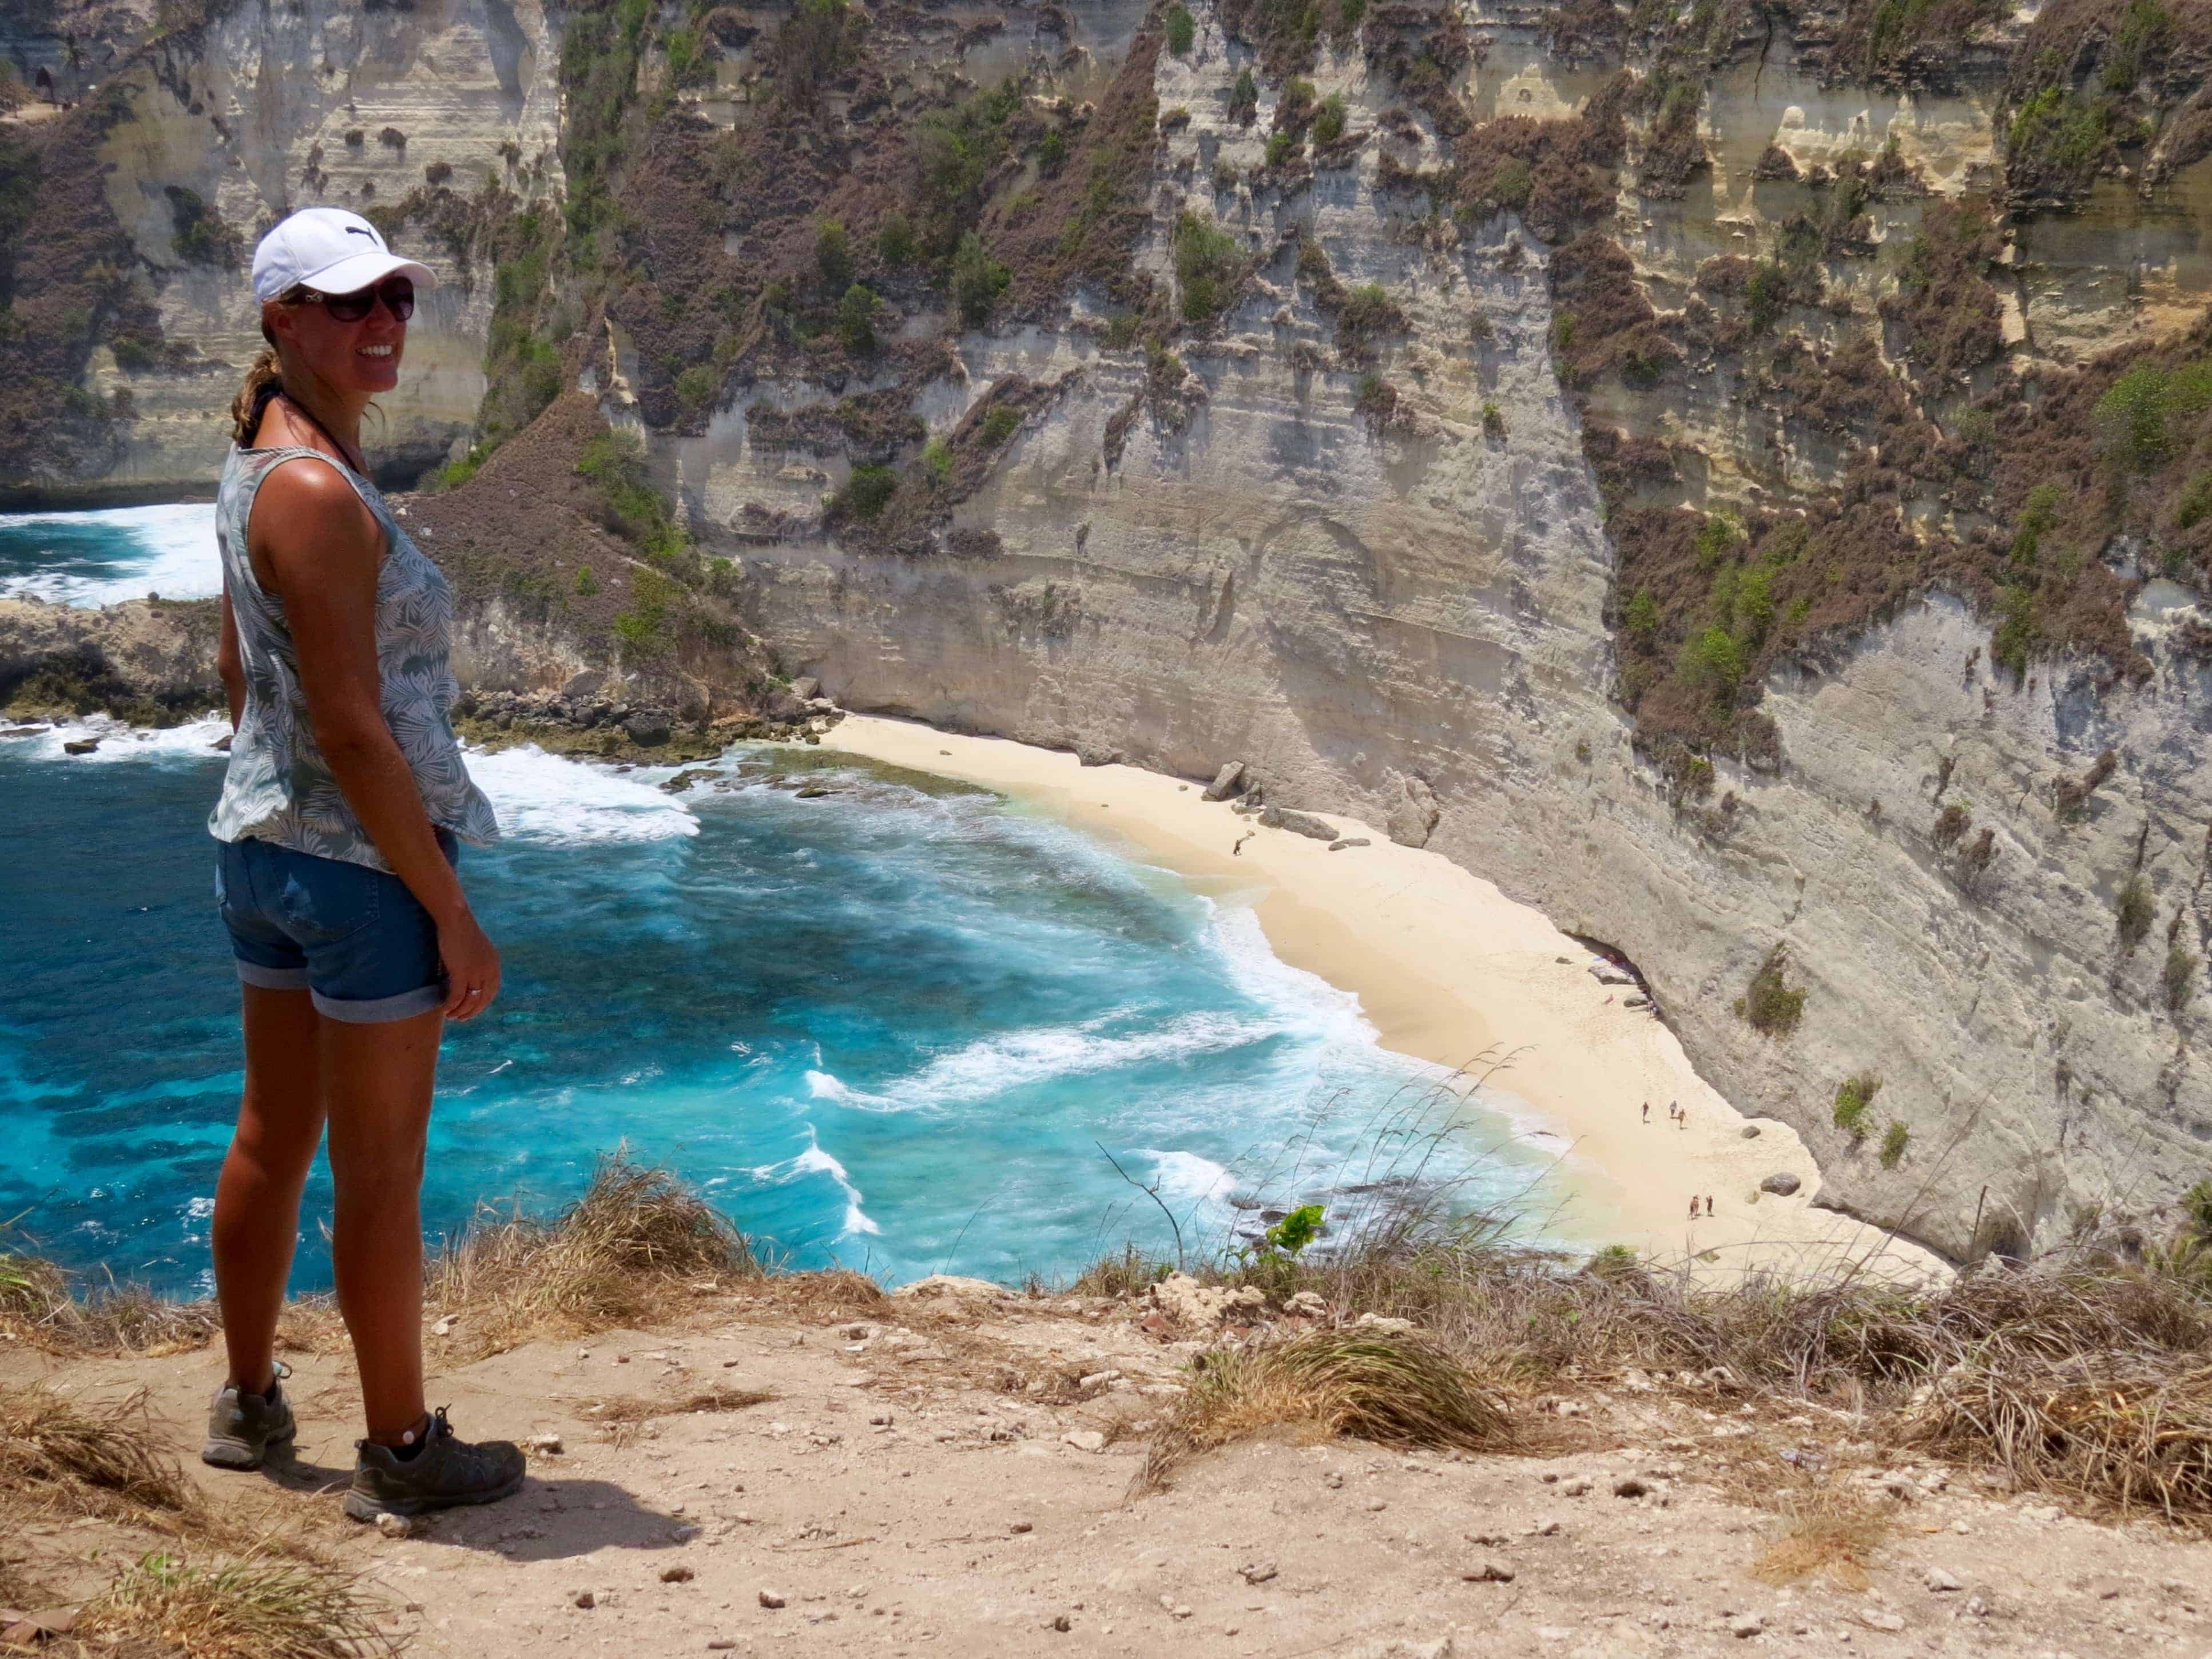 Wear closed shoes on Nusa Penida for the challenging hikes